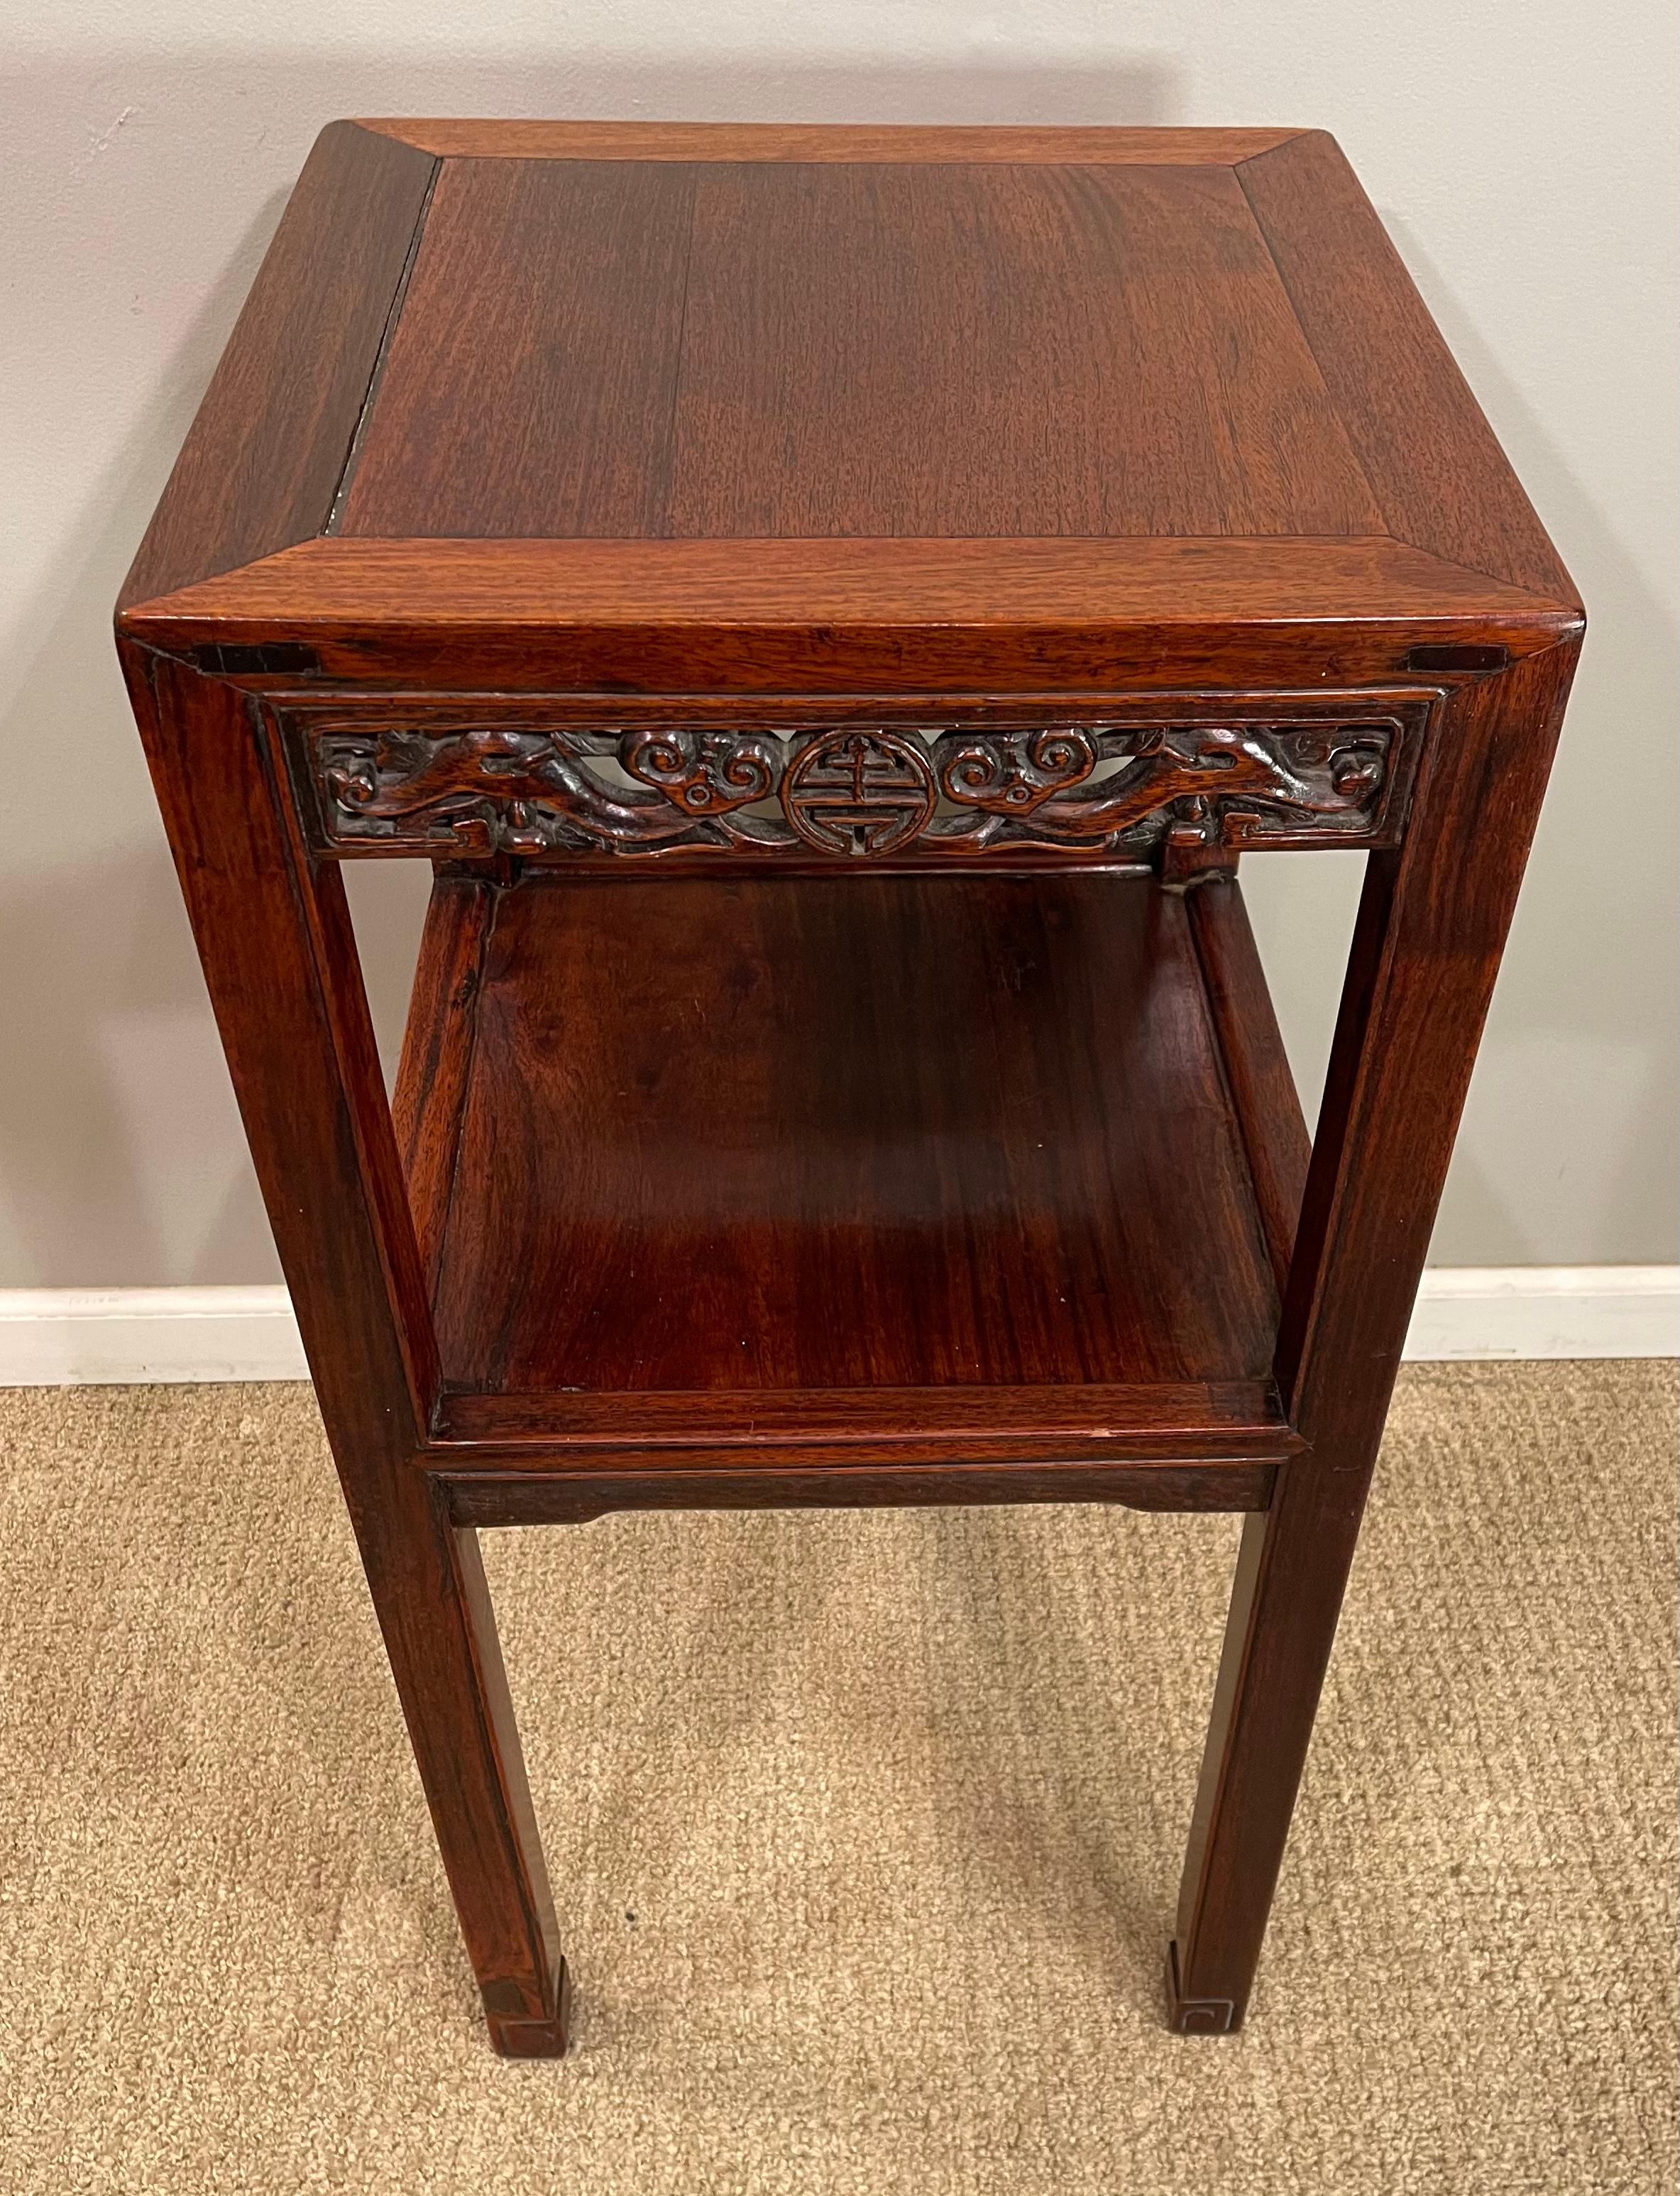 Chinese Hardwood 'Hungmu' Tea Table, Late 19th Century / Early 20th Century For Sale 1